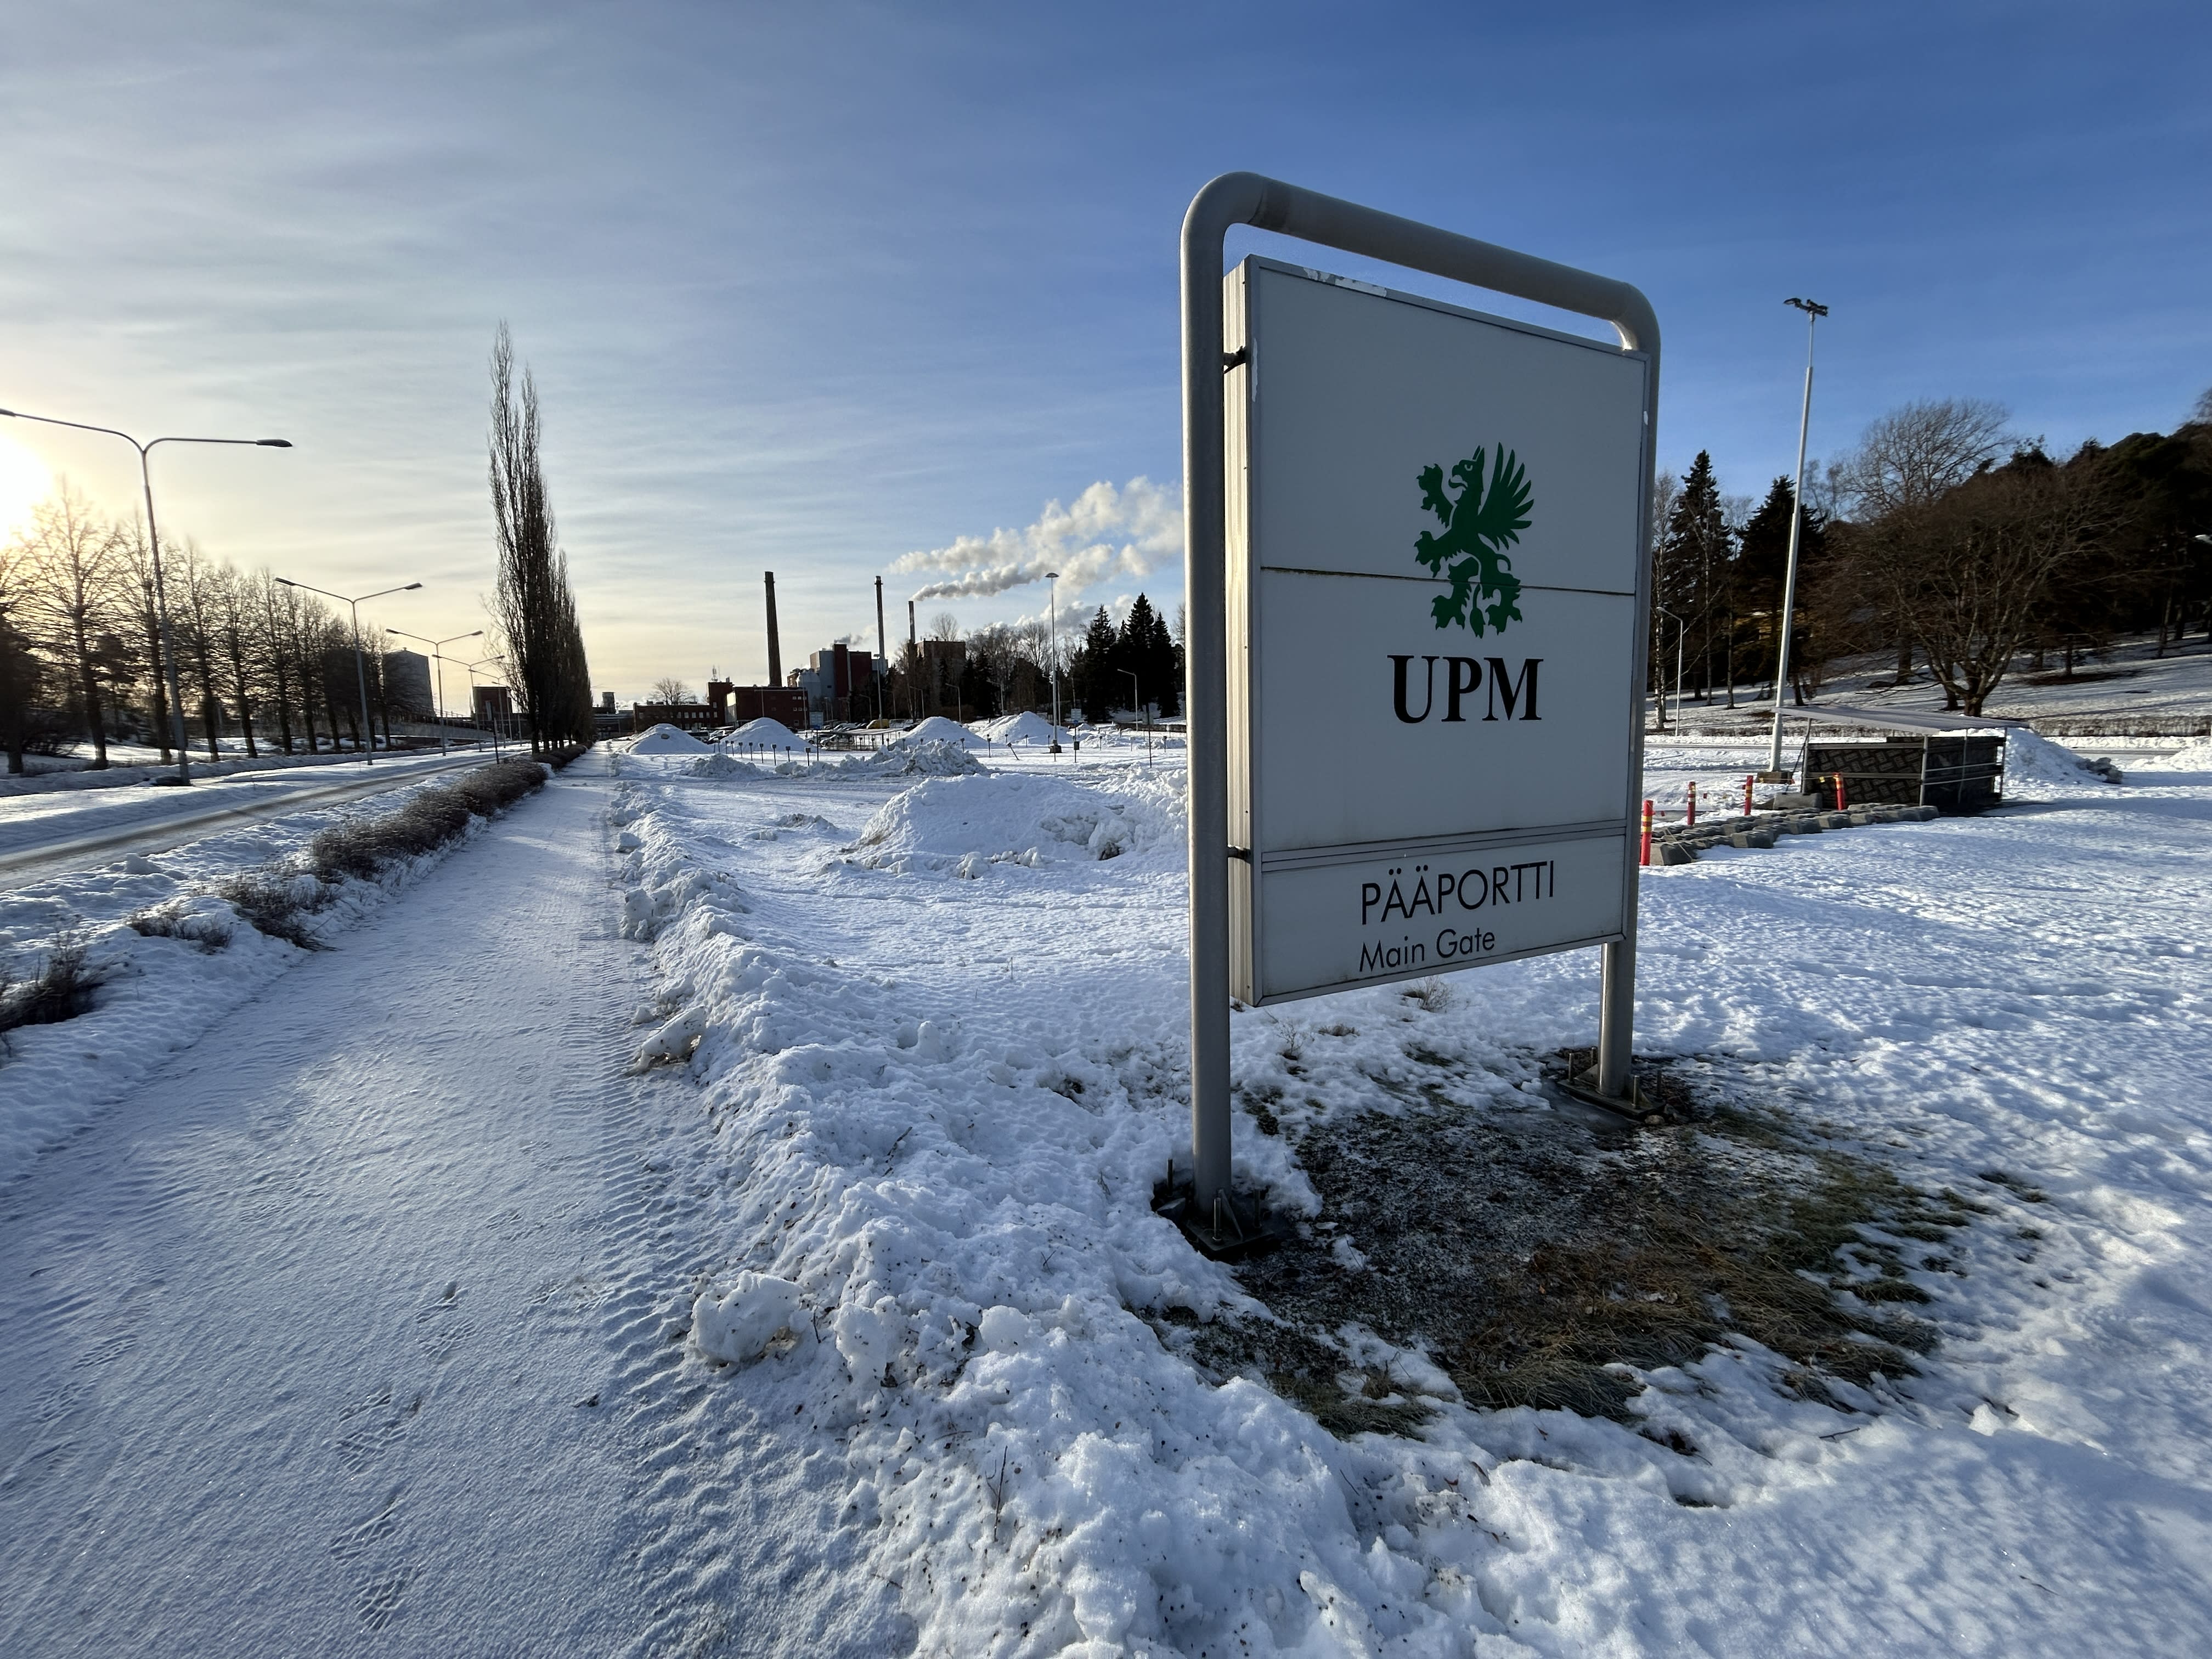 UPM starts personnel negotiations on layoff plans